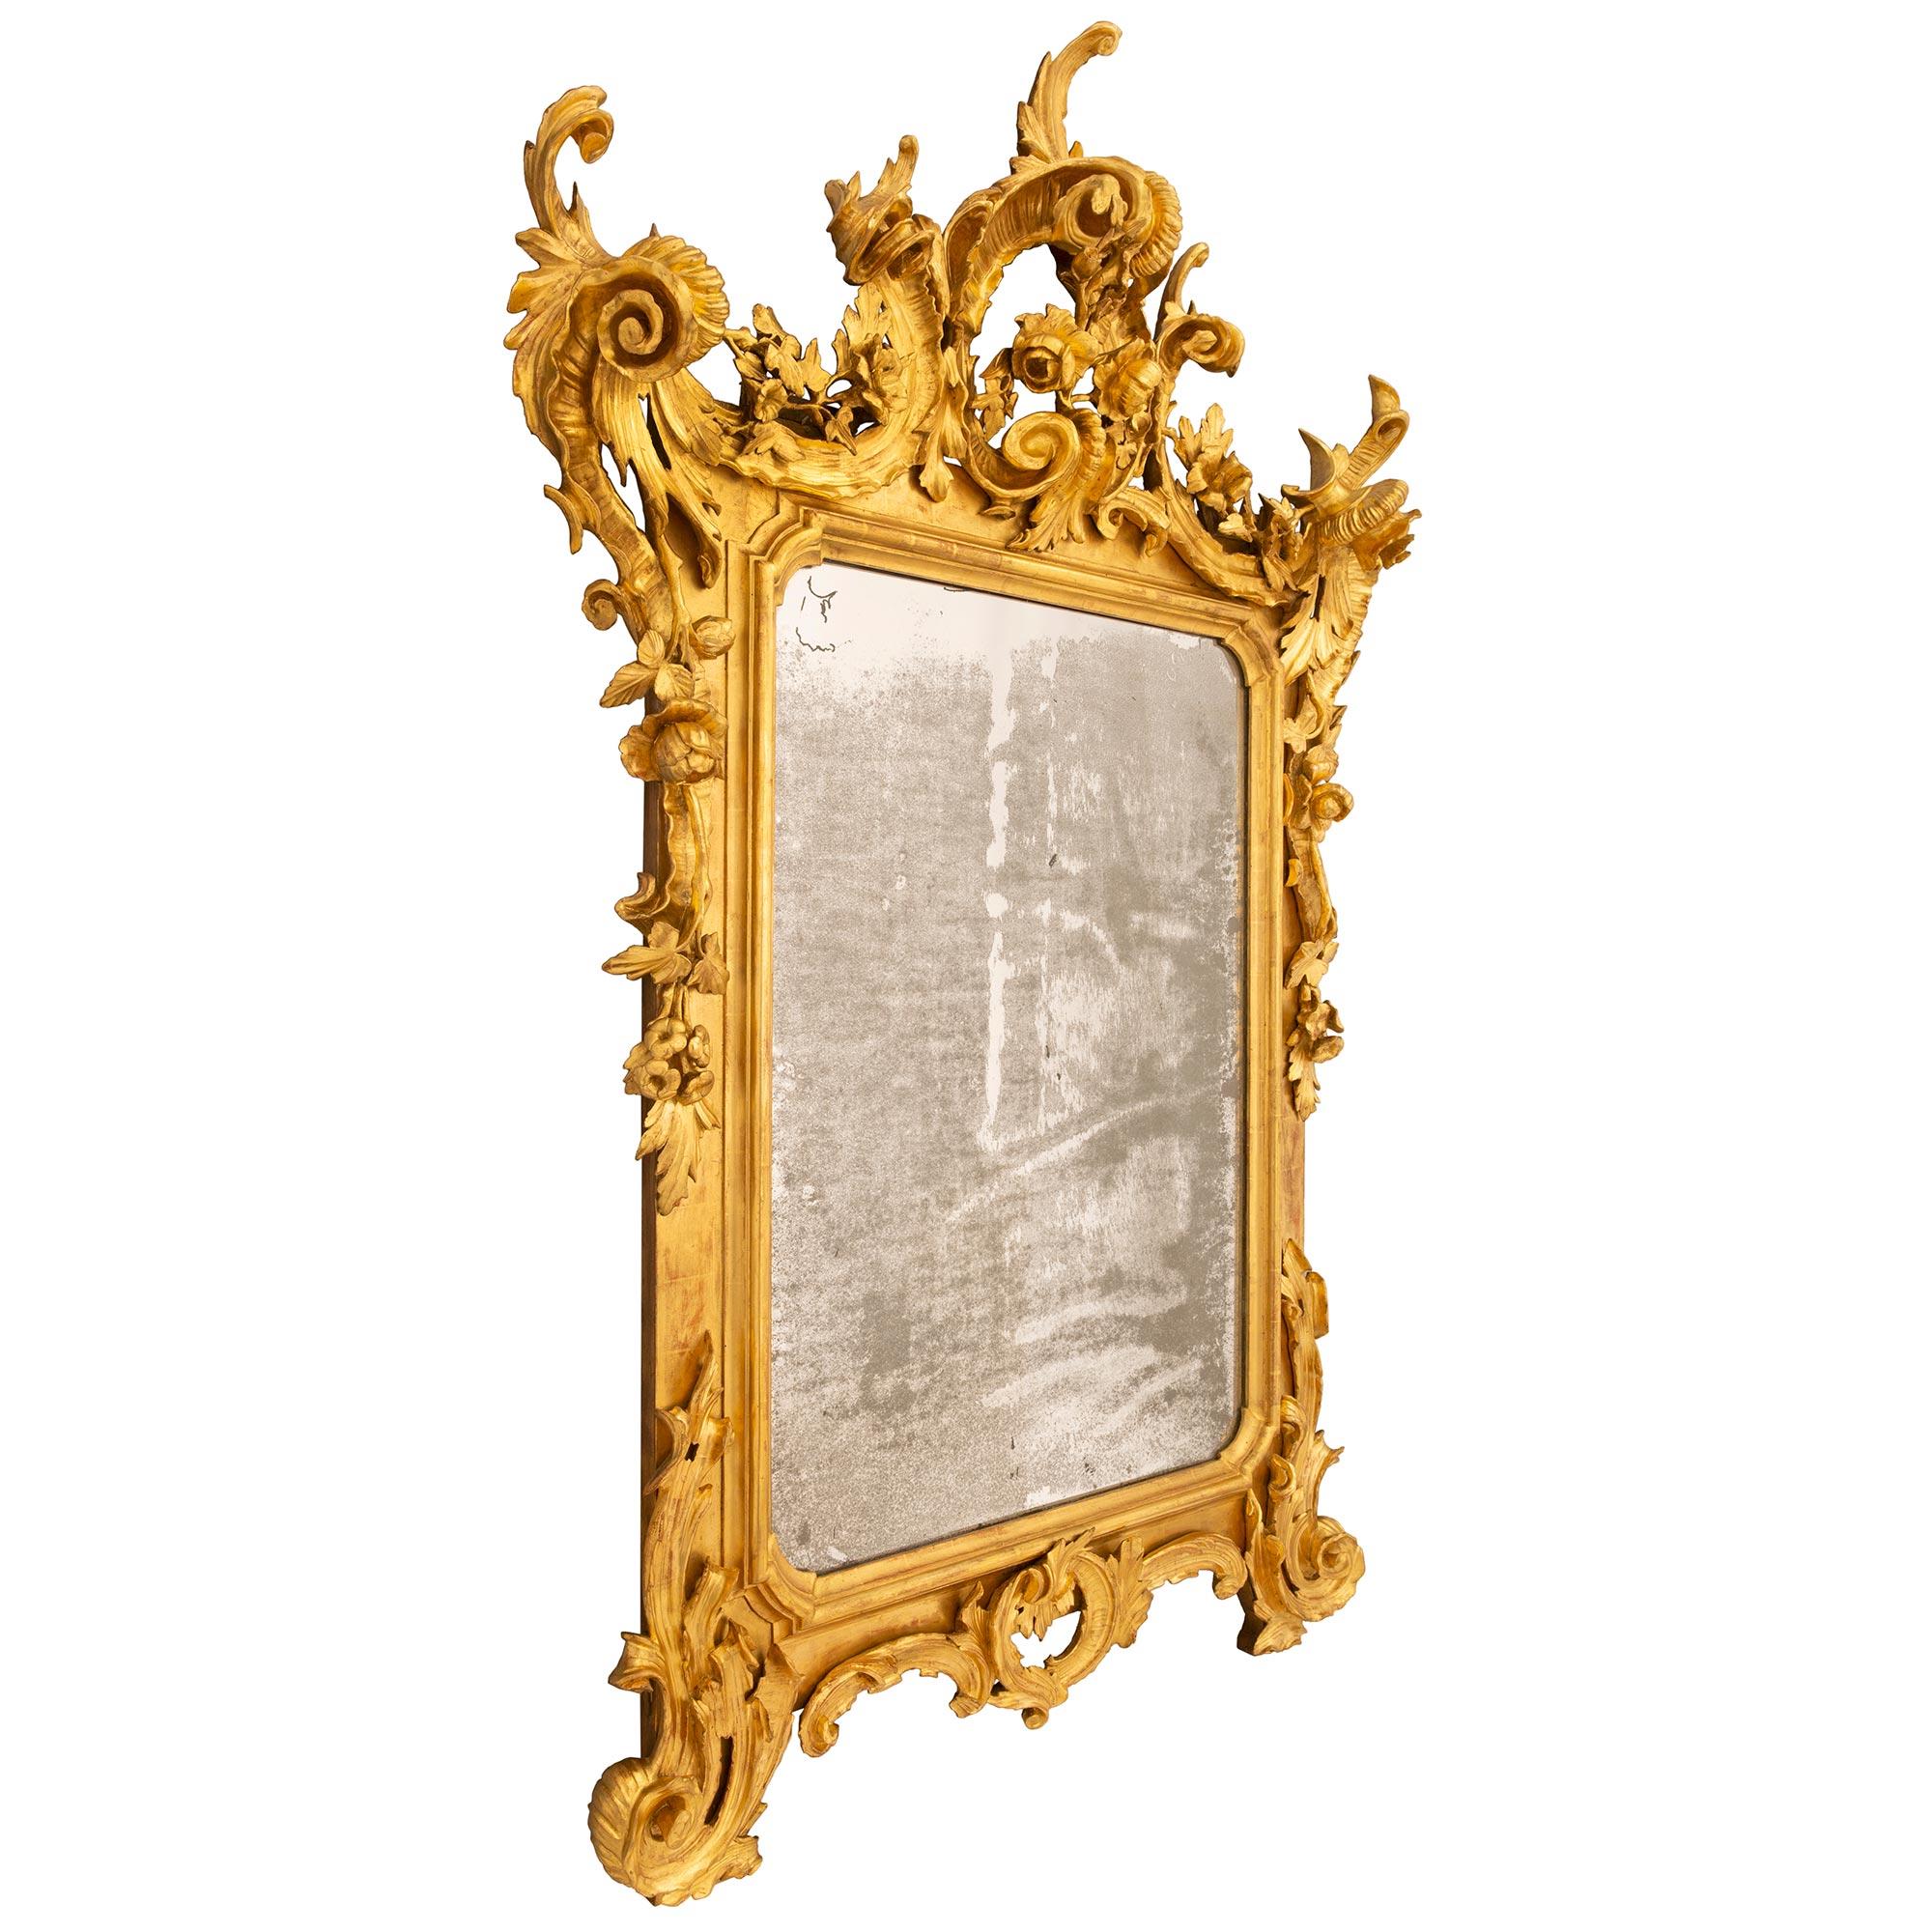 A spectacular and most impressive Italian early 19th century Venetian st. Giltwood mirror. This richly carved mirror is raised by two 'S' scrolled foliate supports flanking the pierced central reserve which is designed with similar scrolled leaves.